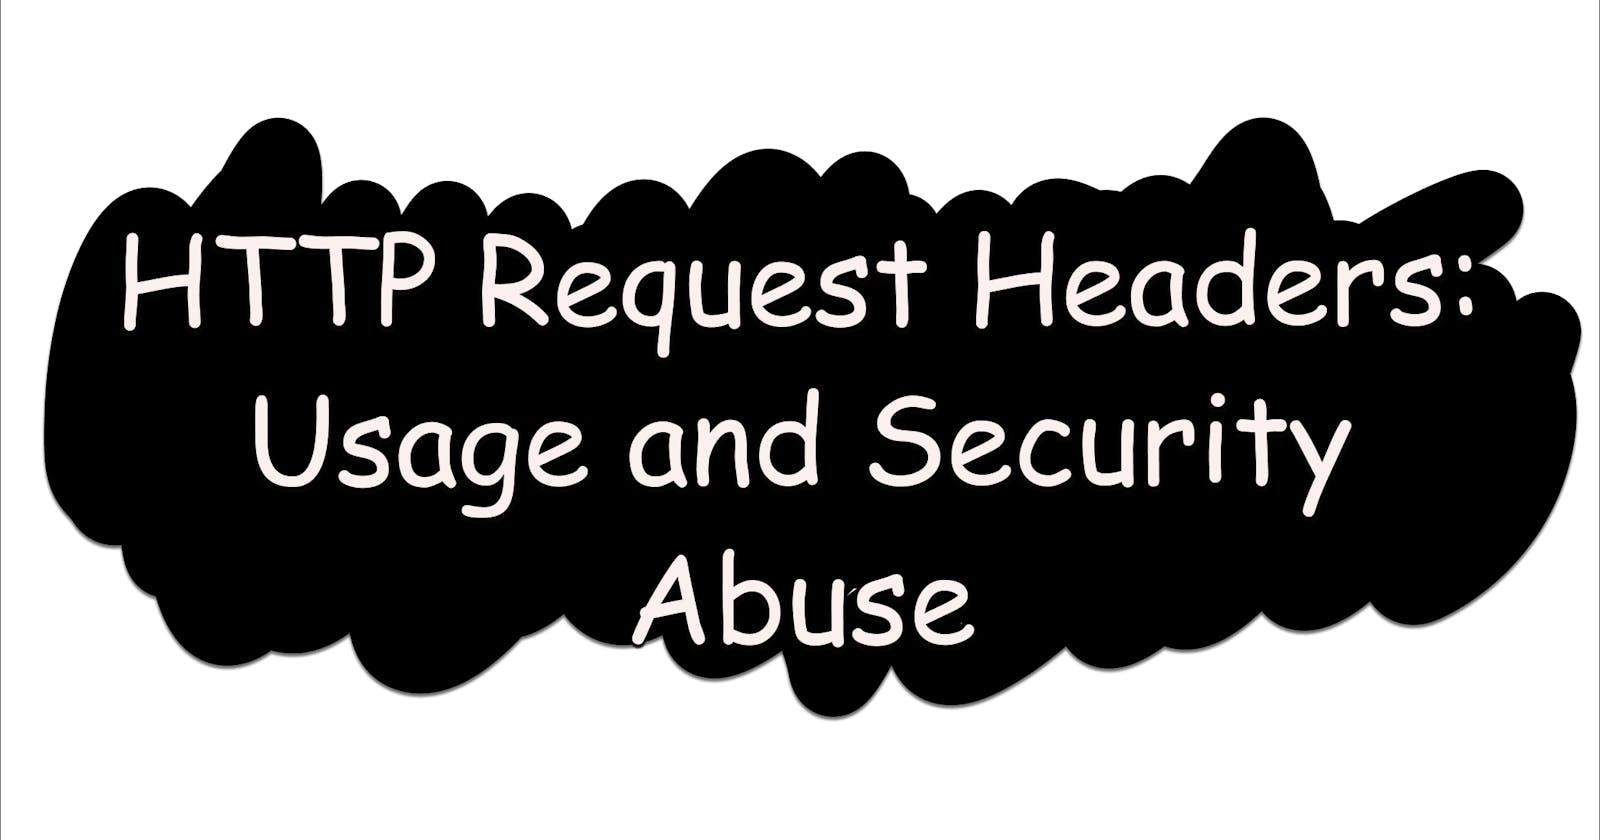 HTTP Request Headers: Usage and Security Abuse